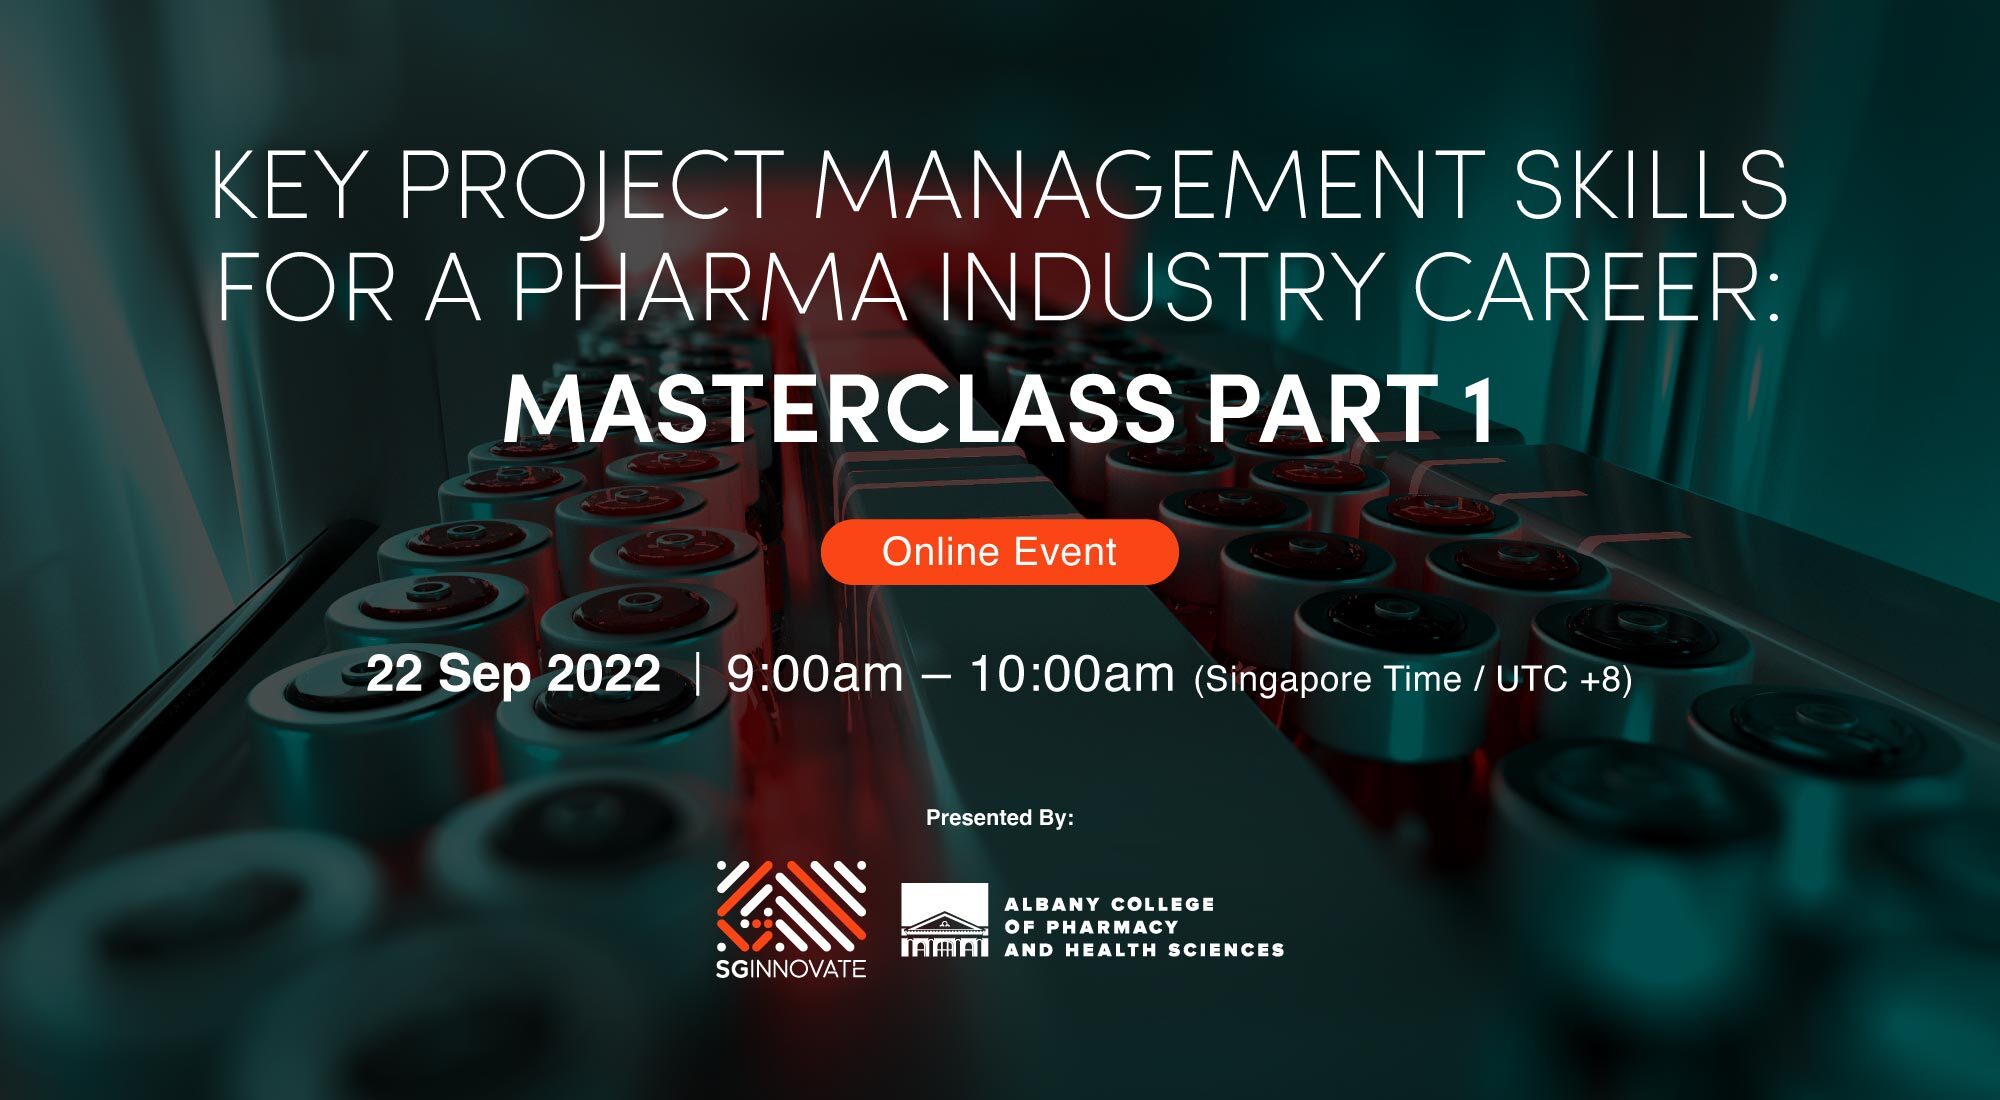 Key Project Management Skills for a Pharma Industry Career: Masterclass Part 1